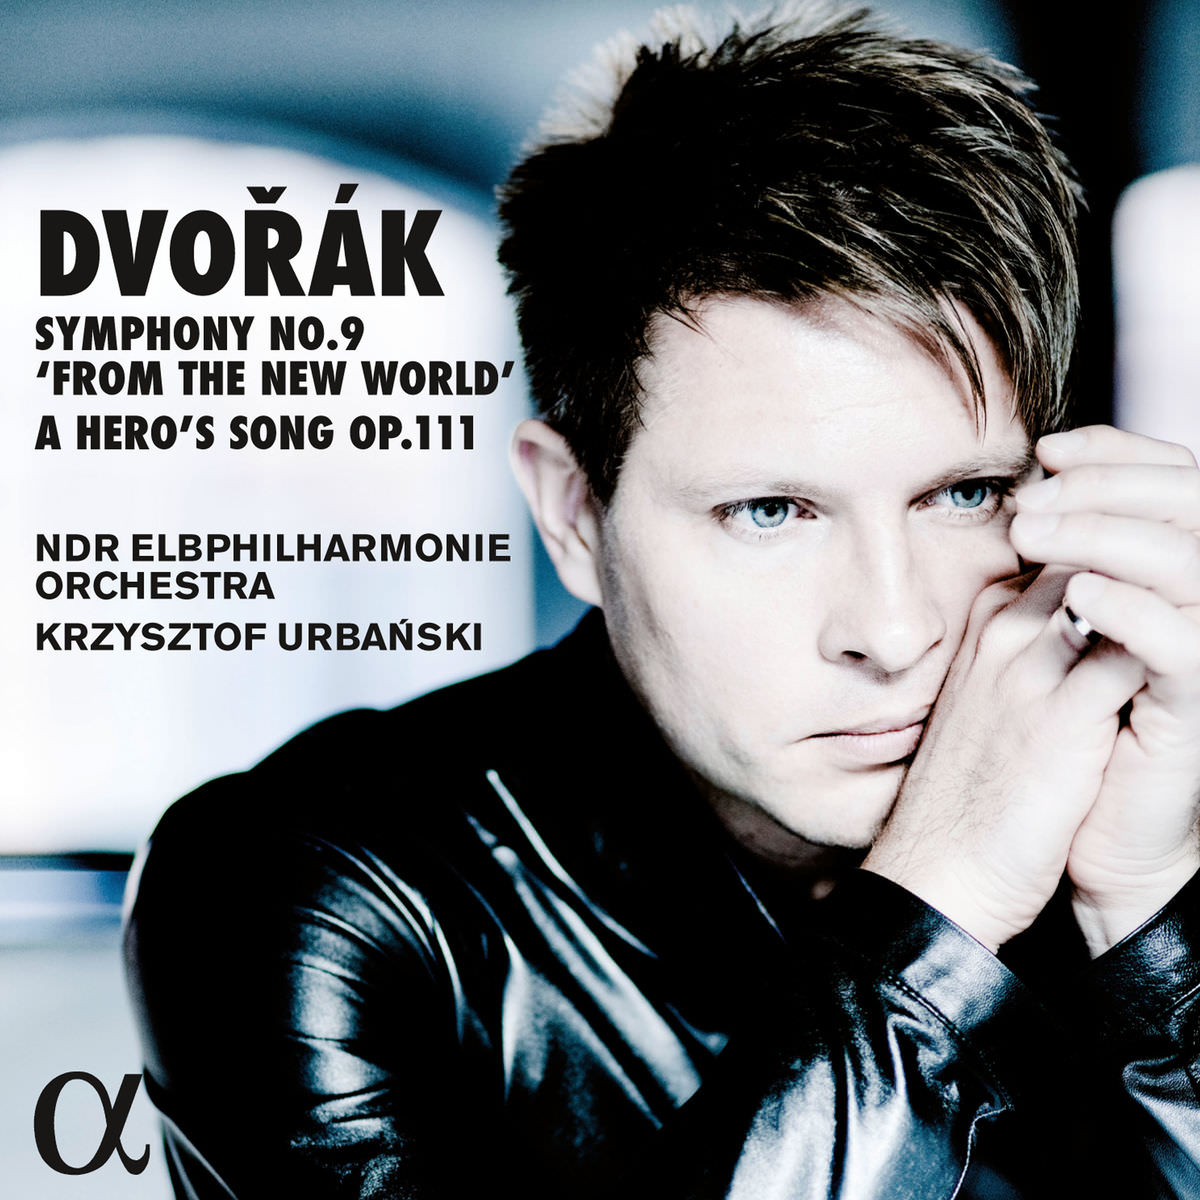 NDR Elbphilharmonie Orchestra, Krzysztof Urbański – Dvořák: Symphony No. 9 in E Minor, Op. 95 “From the New World” & A Hero’s Song, Op. 111 (2018) [Official Digital Download 24bit/48kHz]